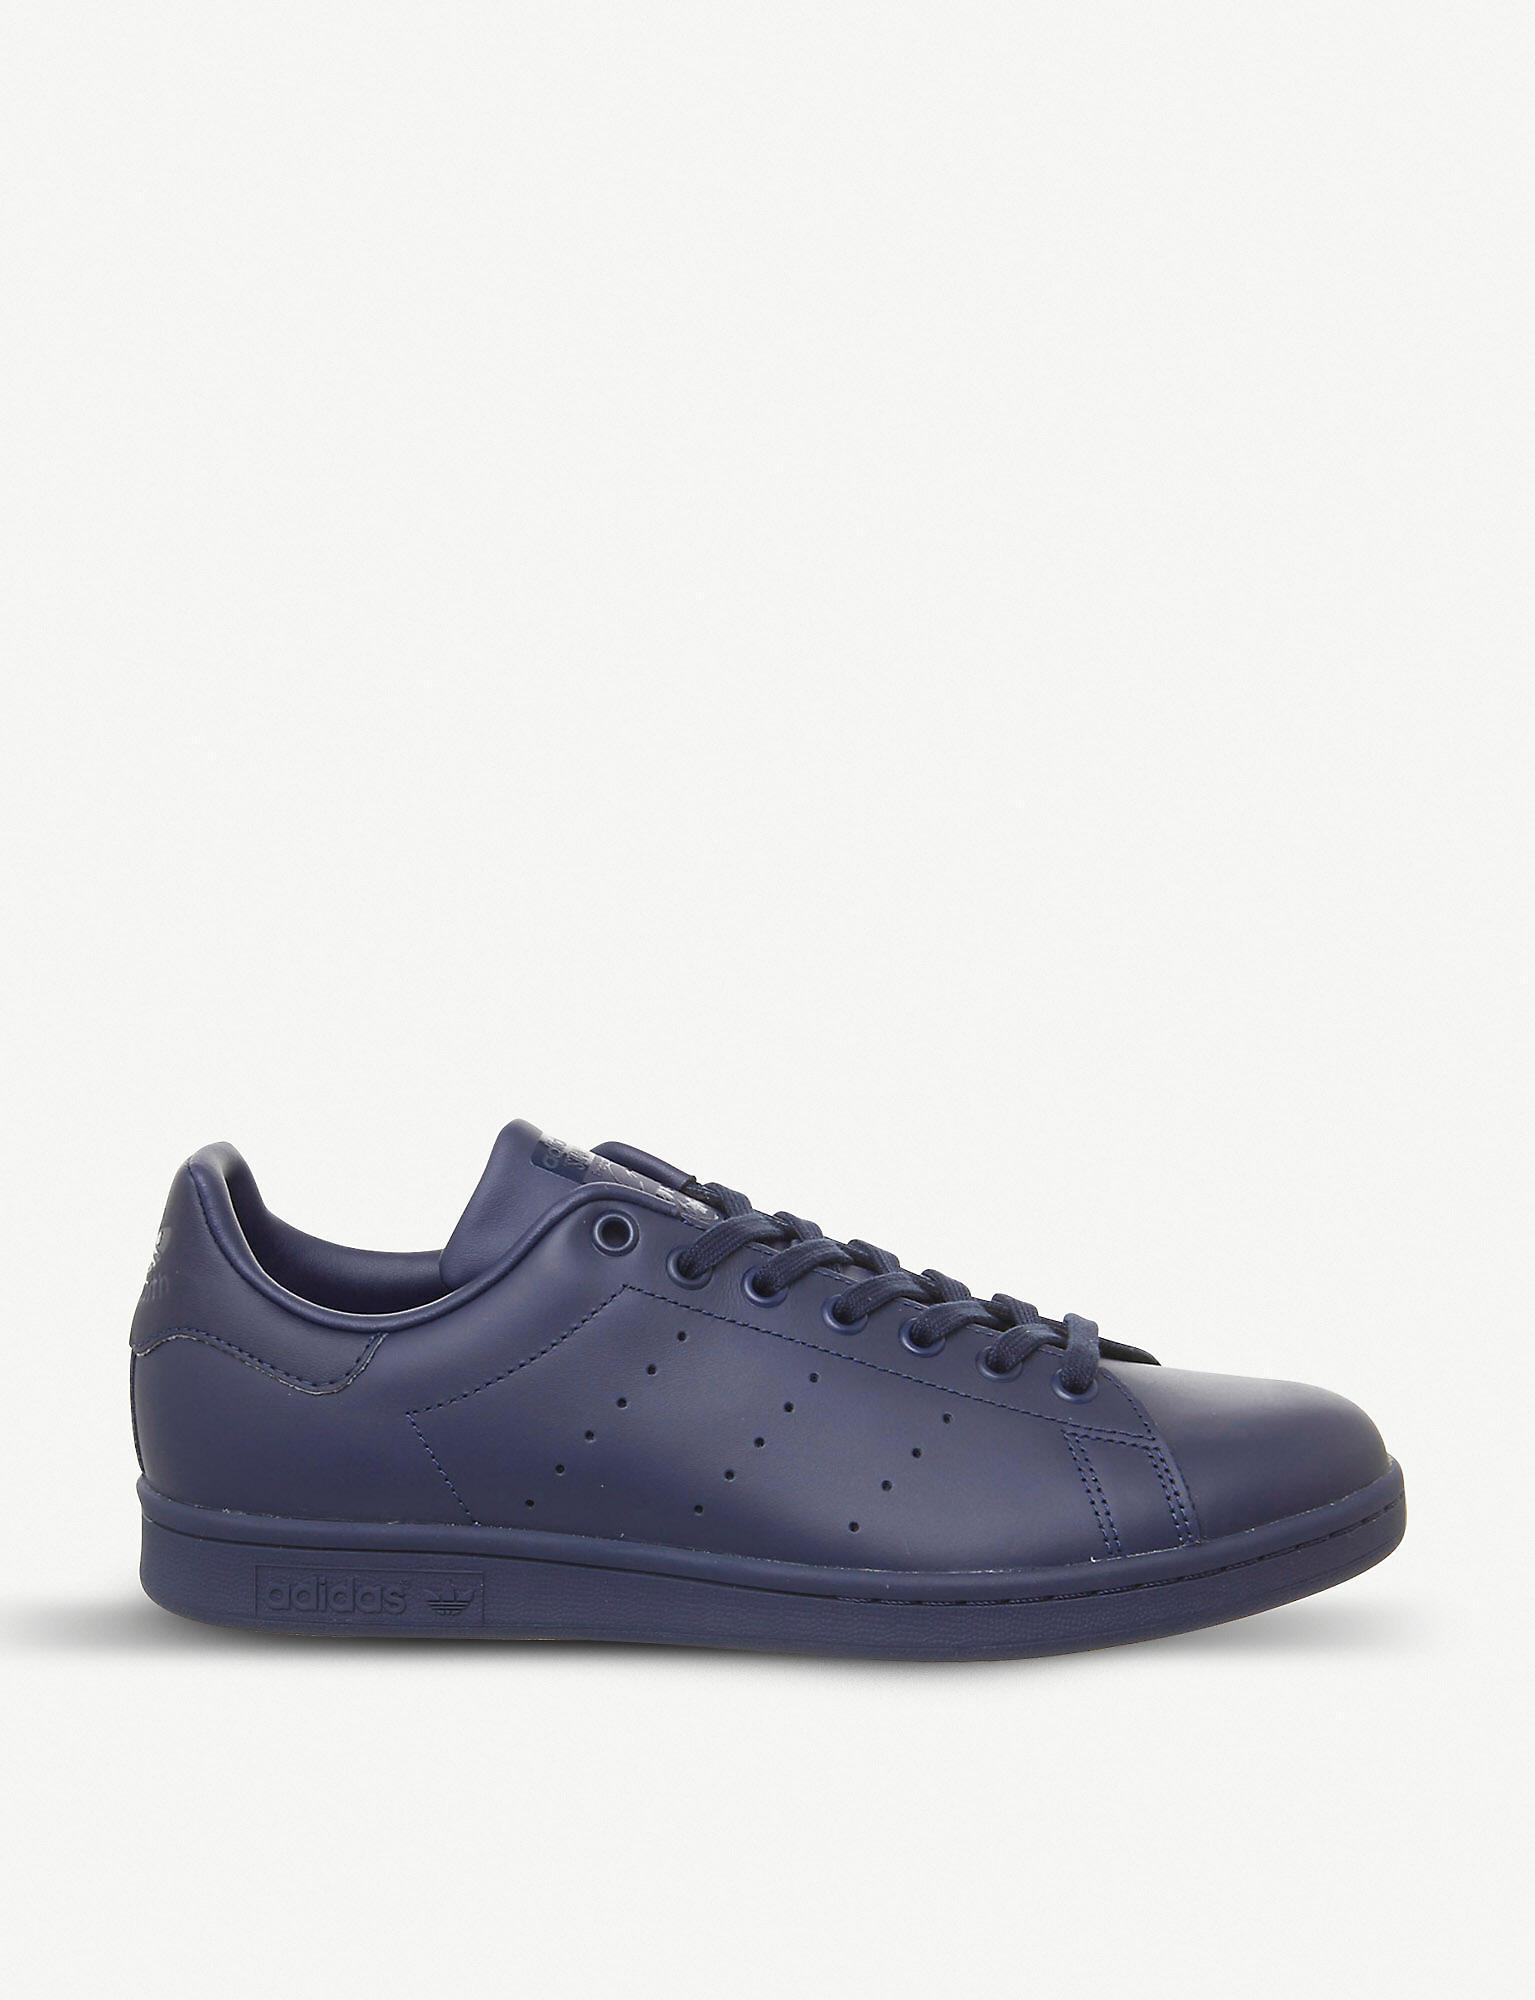 stan smith shoes navy